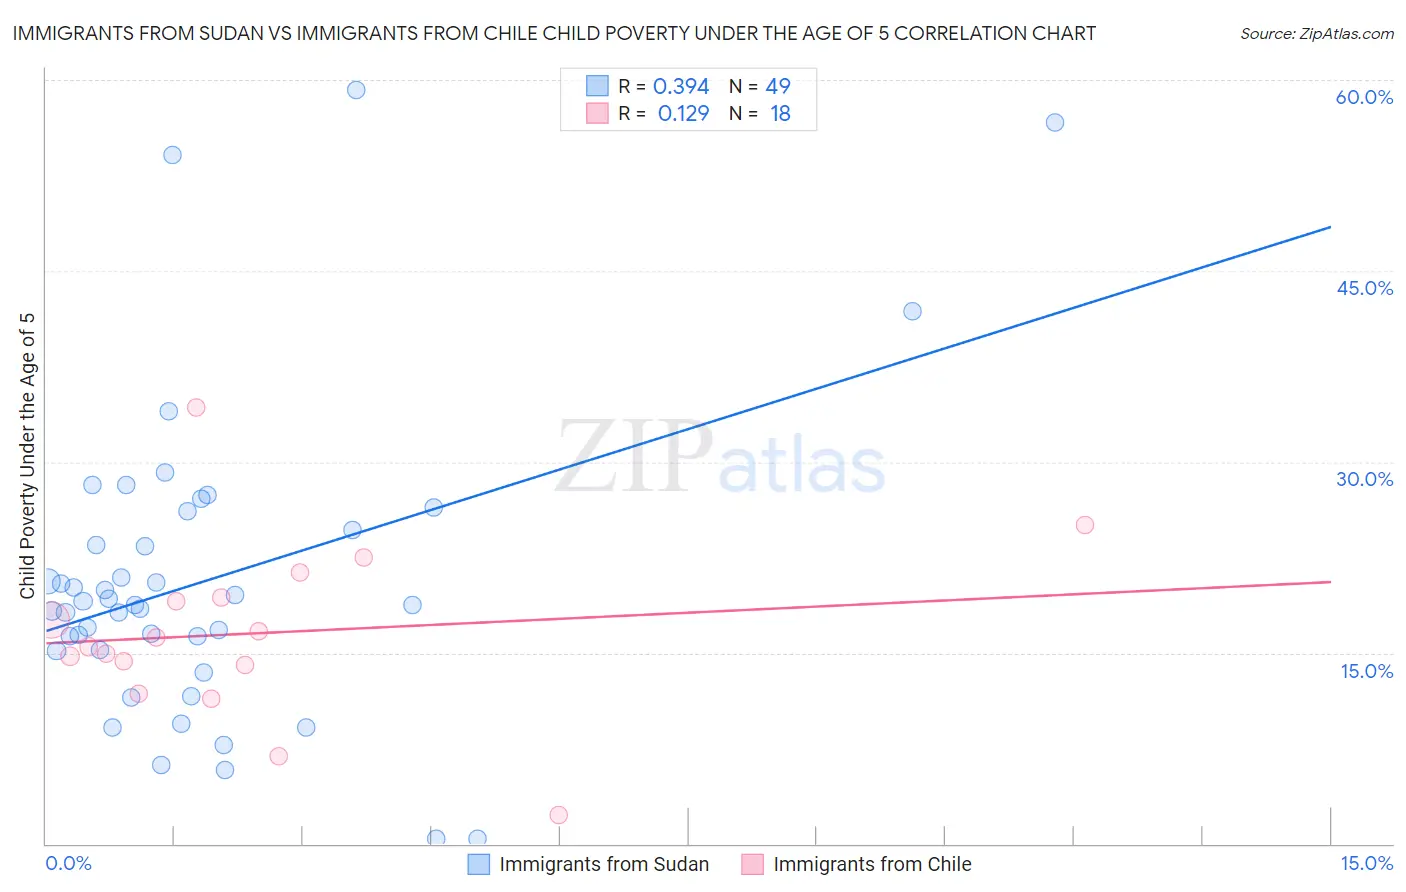 Immigrants from Sudan vs Immigrants from Chile Child Poverty Under the Age of 5